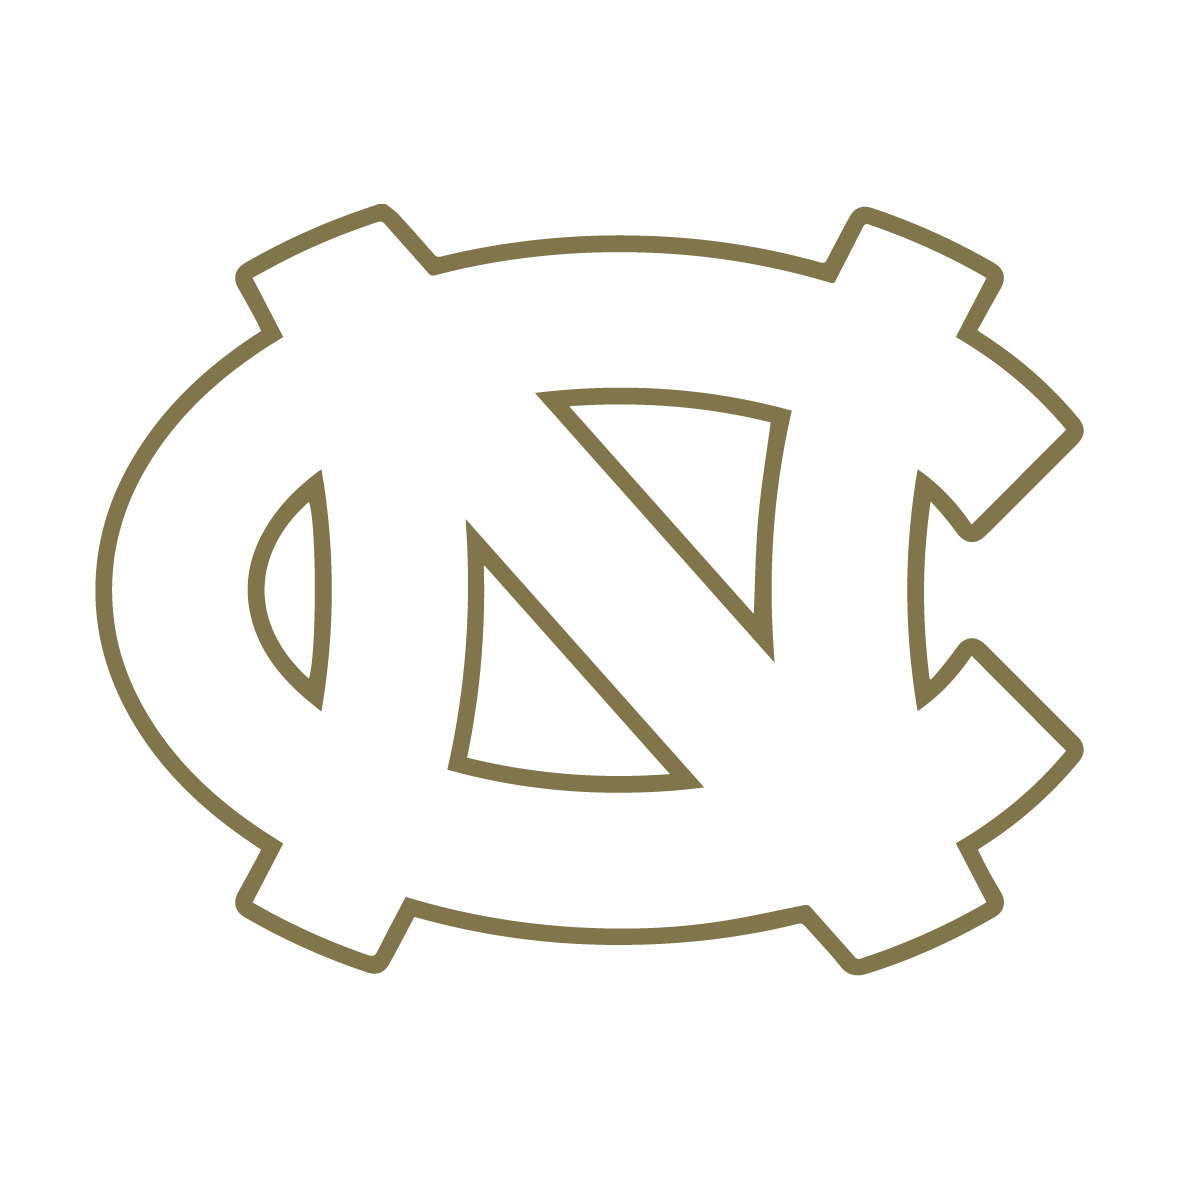 The Wandering Social Trusted By UNC Tarheels